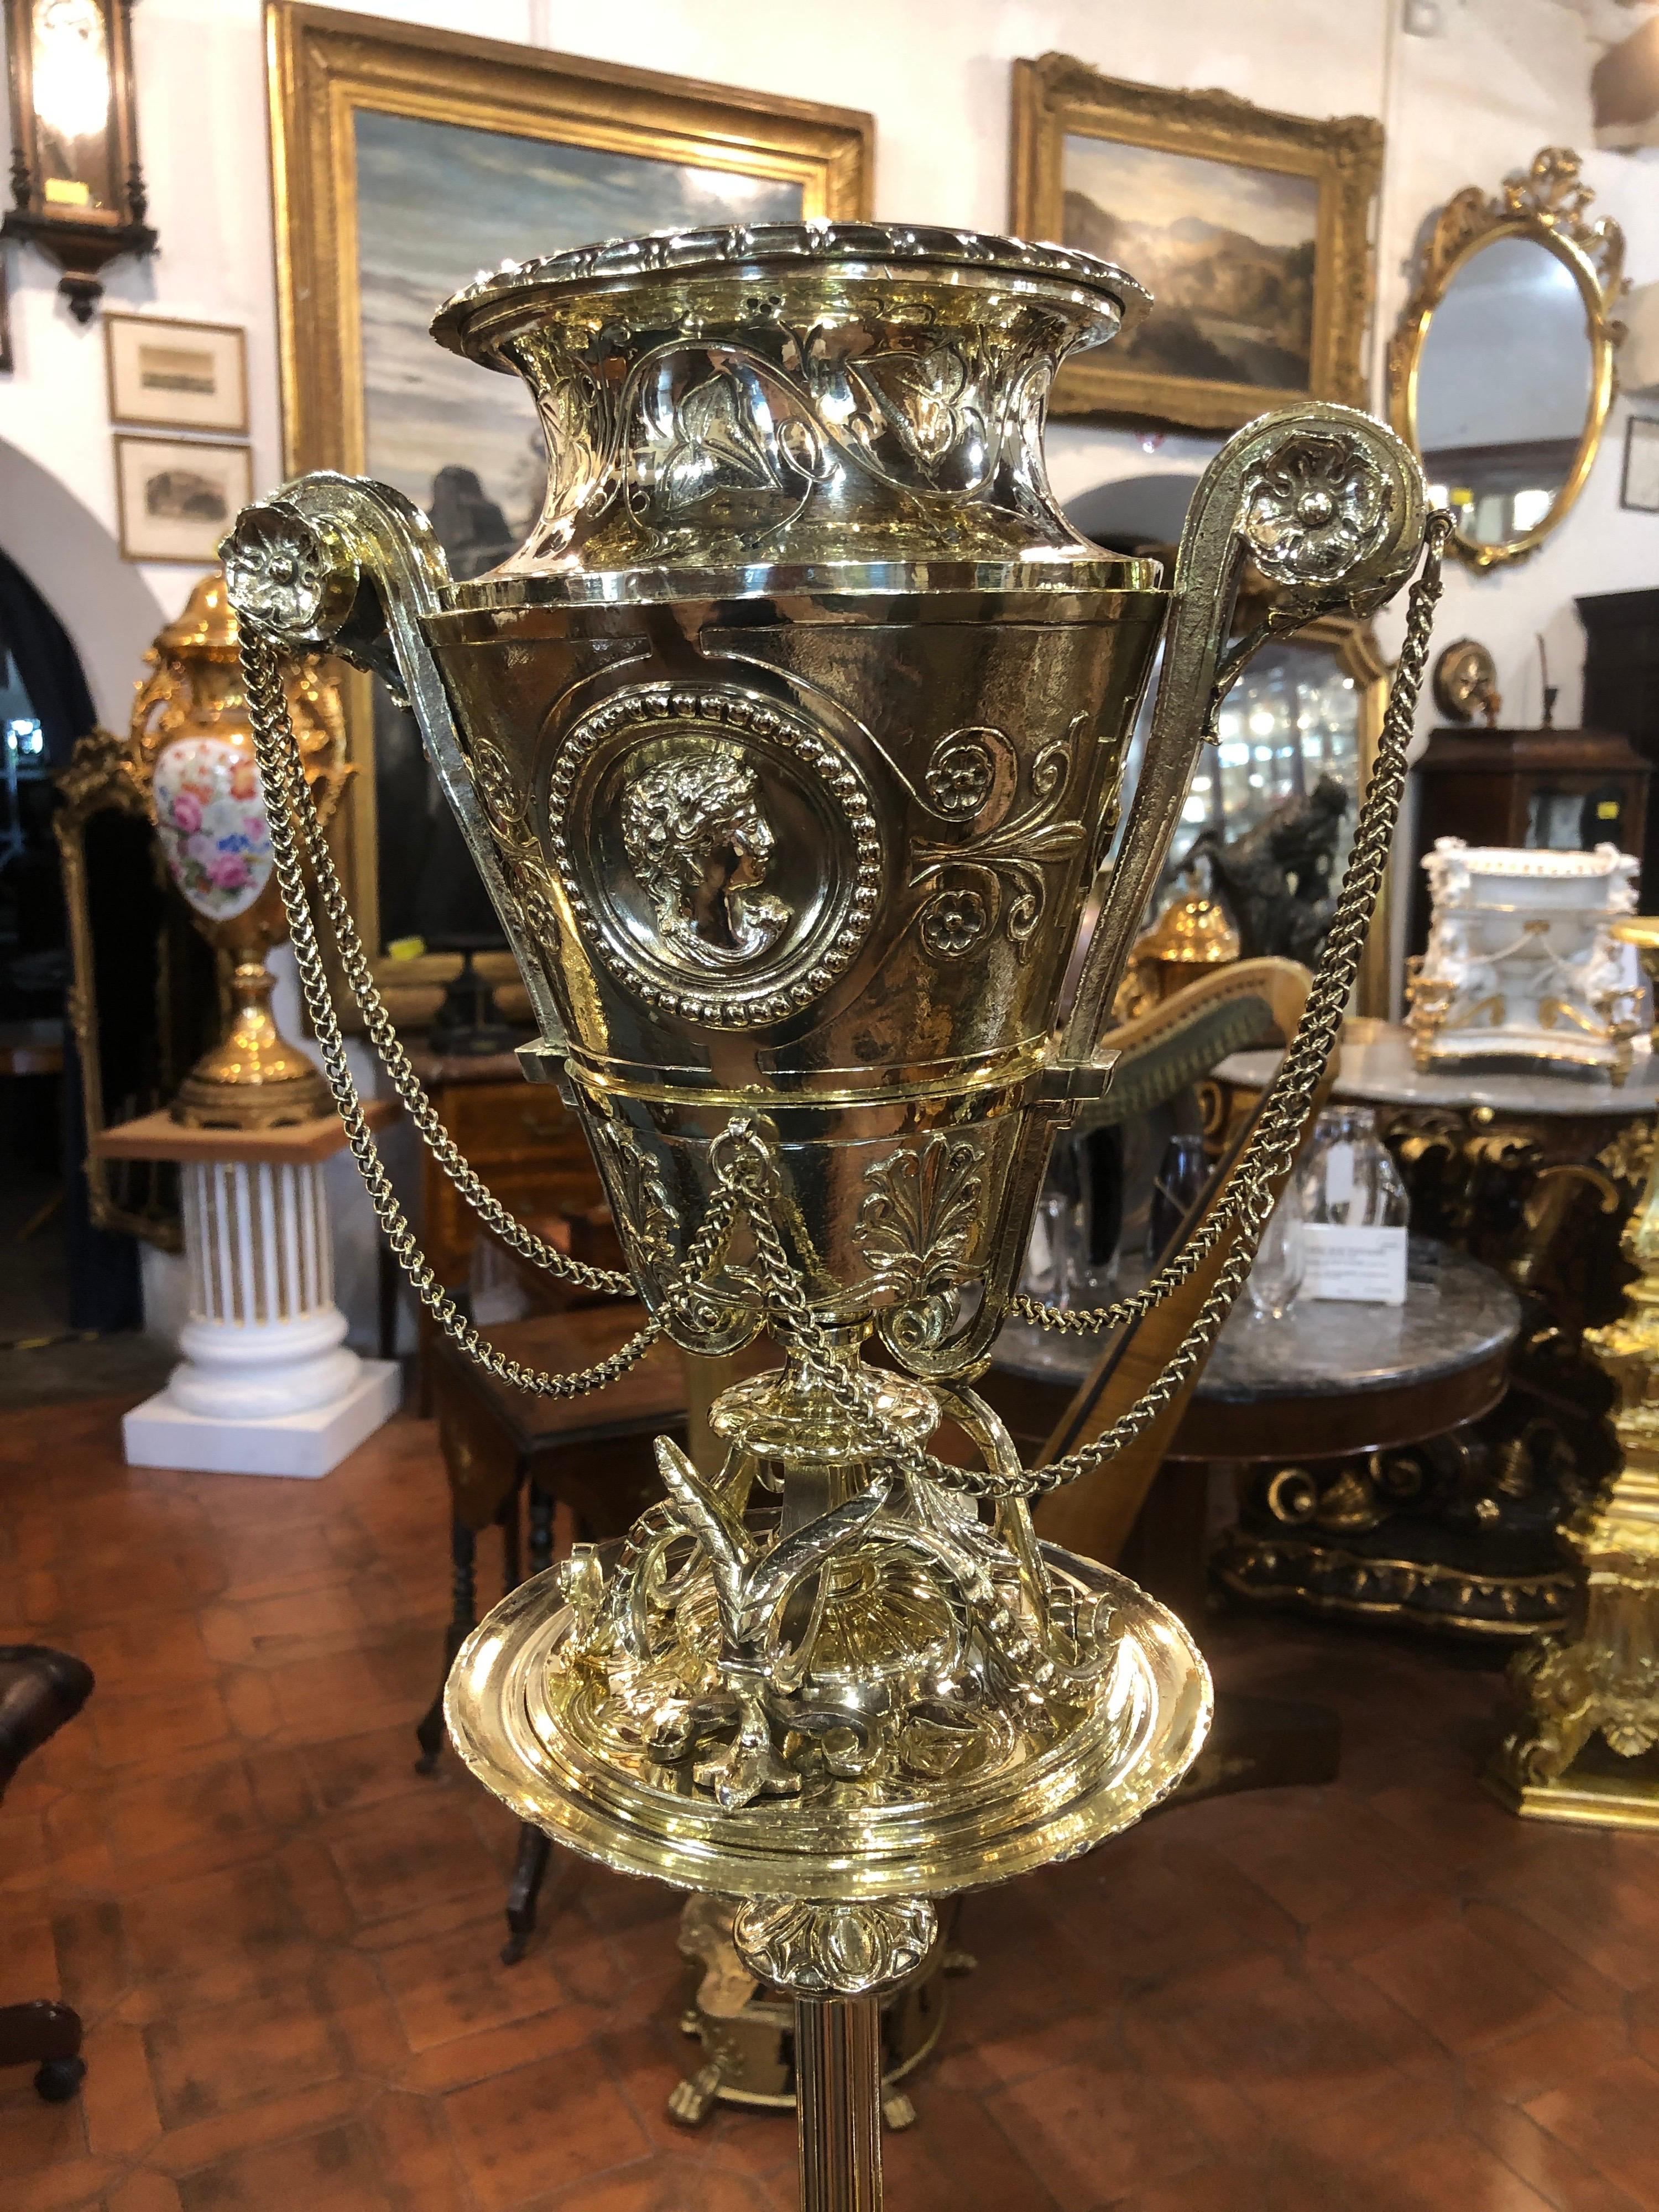 Fantastic pair of French brass gueridon, second half of the 19th century.
It is composed in two parts so as to become two vases and two candle holders, finely chiselled and in perfect condition.
Unique objects for unique environments!